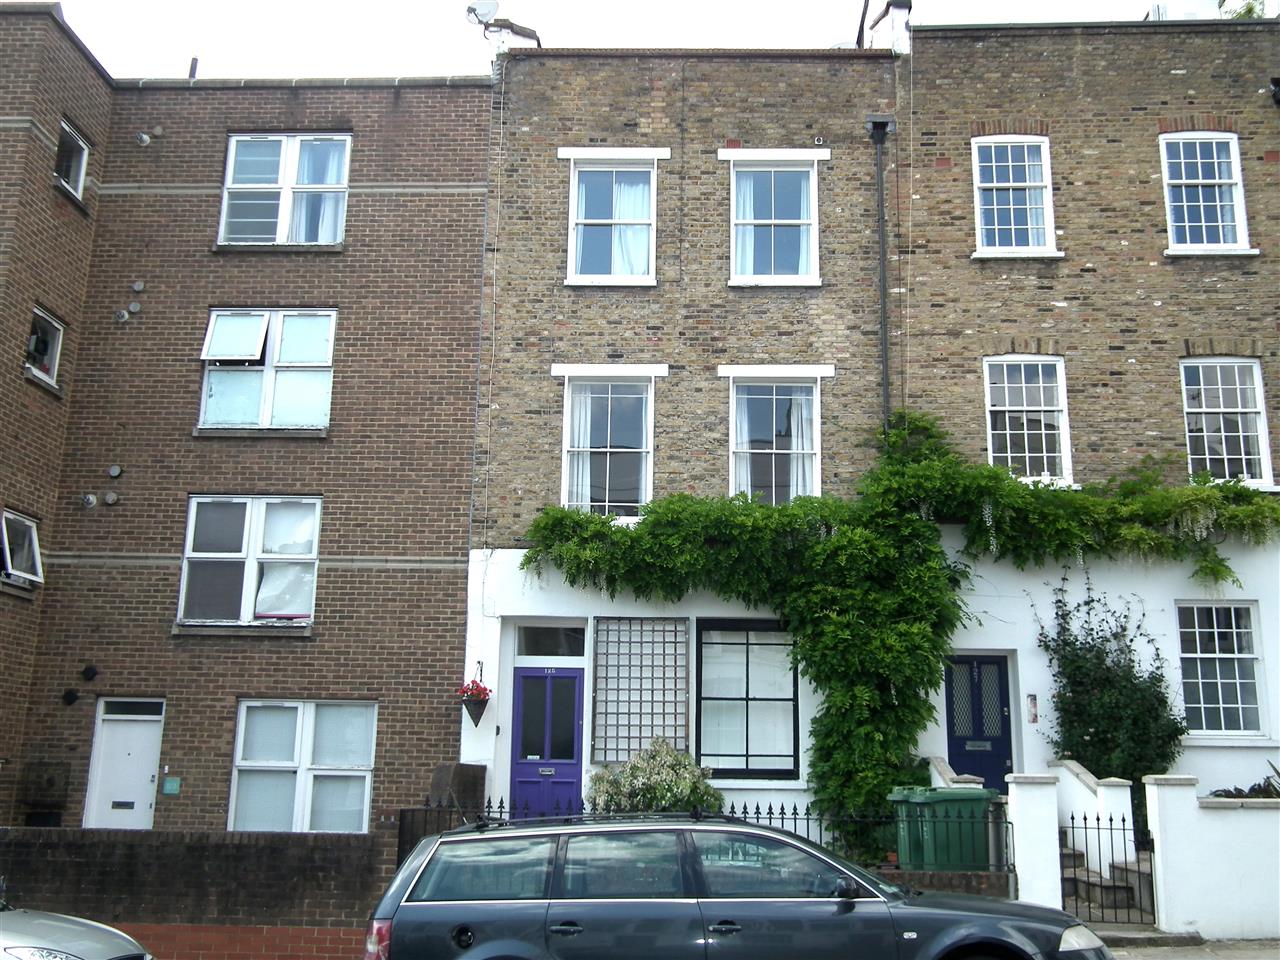 AVAILABLE 10TH JULY 2021. Located in a popular turning equidistant from the facilities, transport, bars and restaurants of Tufnell Park and Kentish Town is this well proportioned and well presented PART FURNISHED ground floor converted flat with sole use of a sunny rear garden. The ...